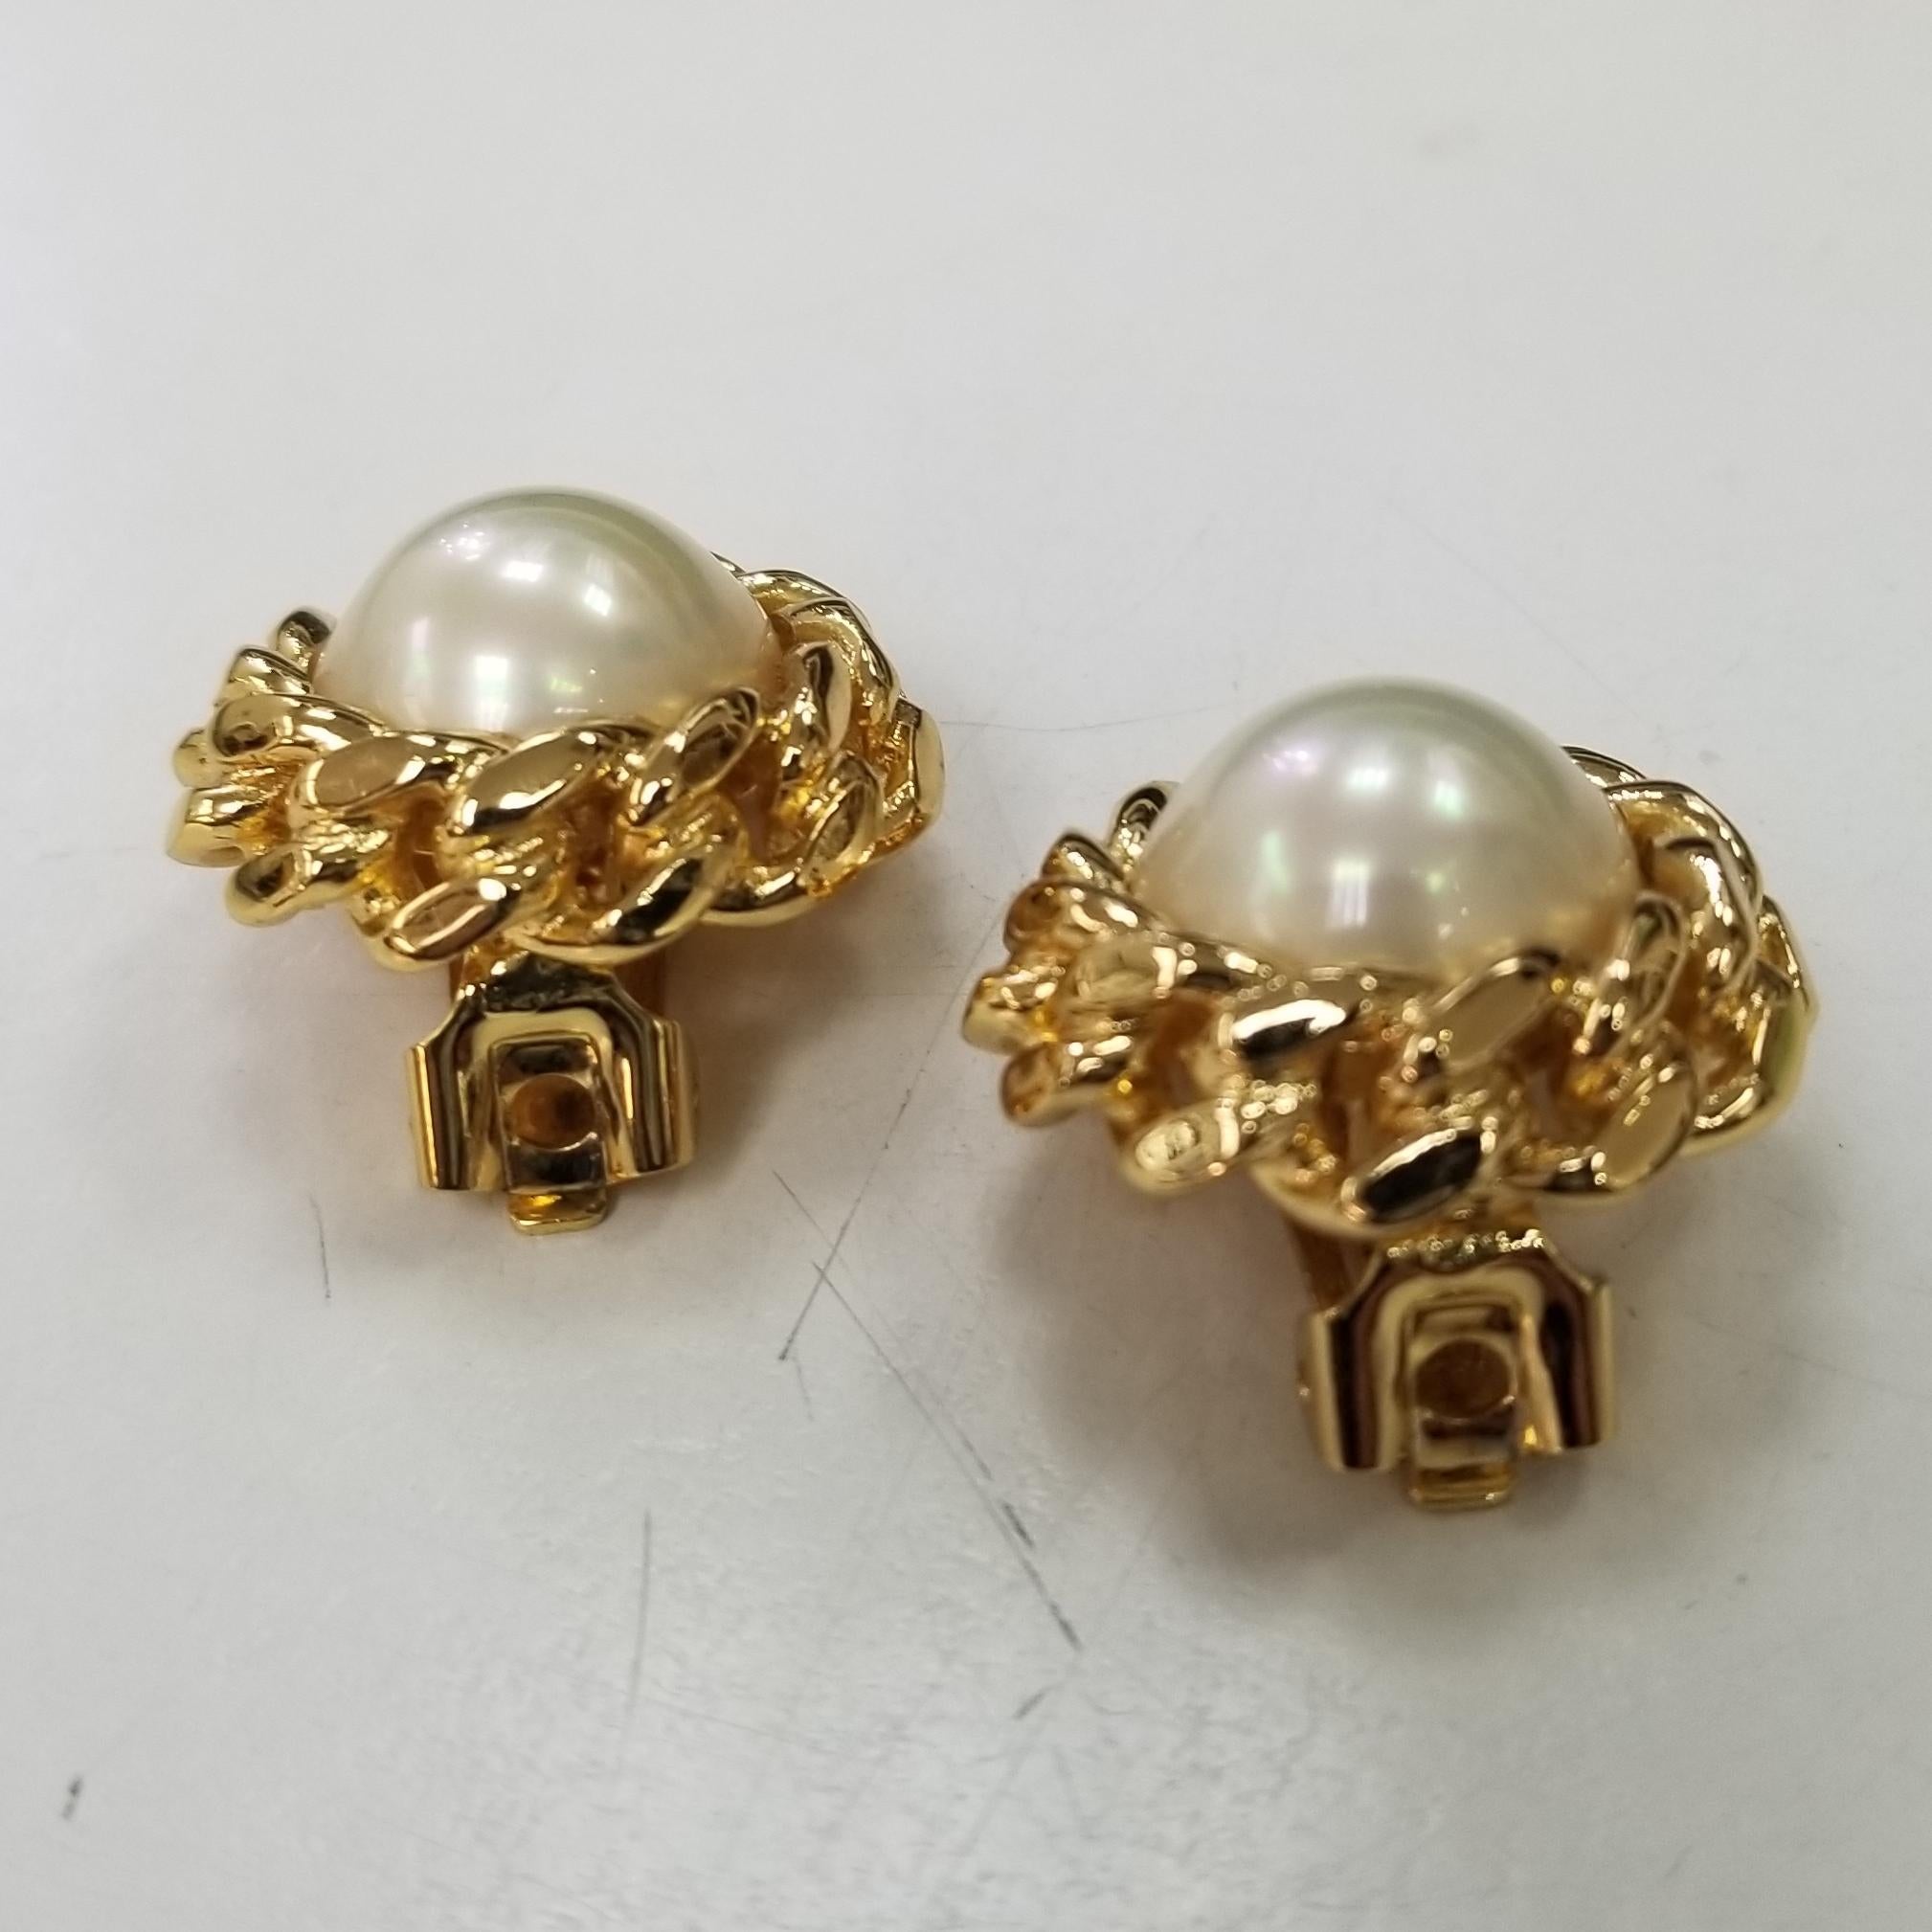 A large statement pair of vintage Christian Dior earrings. Gold tone and faux pearl, excellant condition signed and authentic.